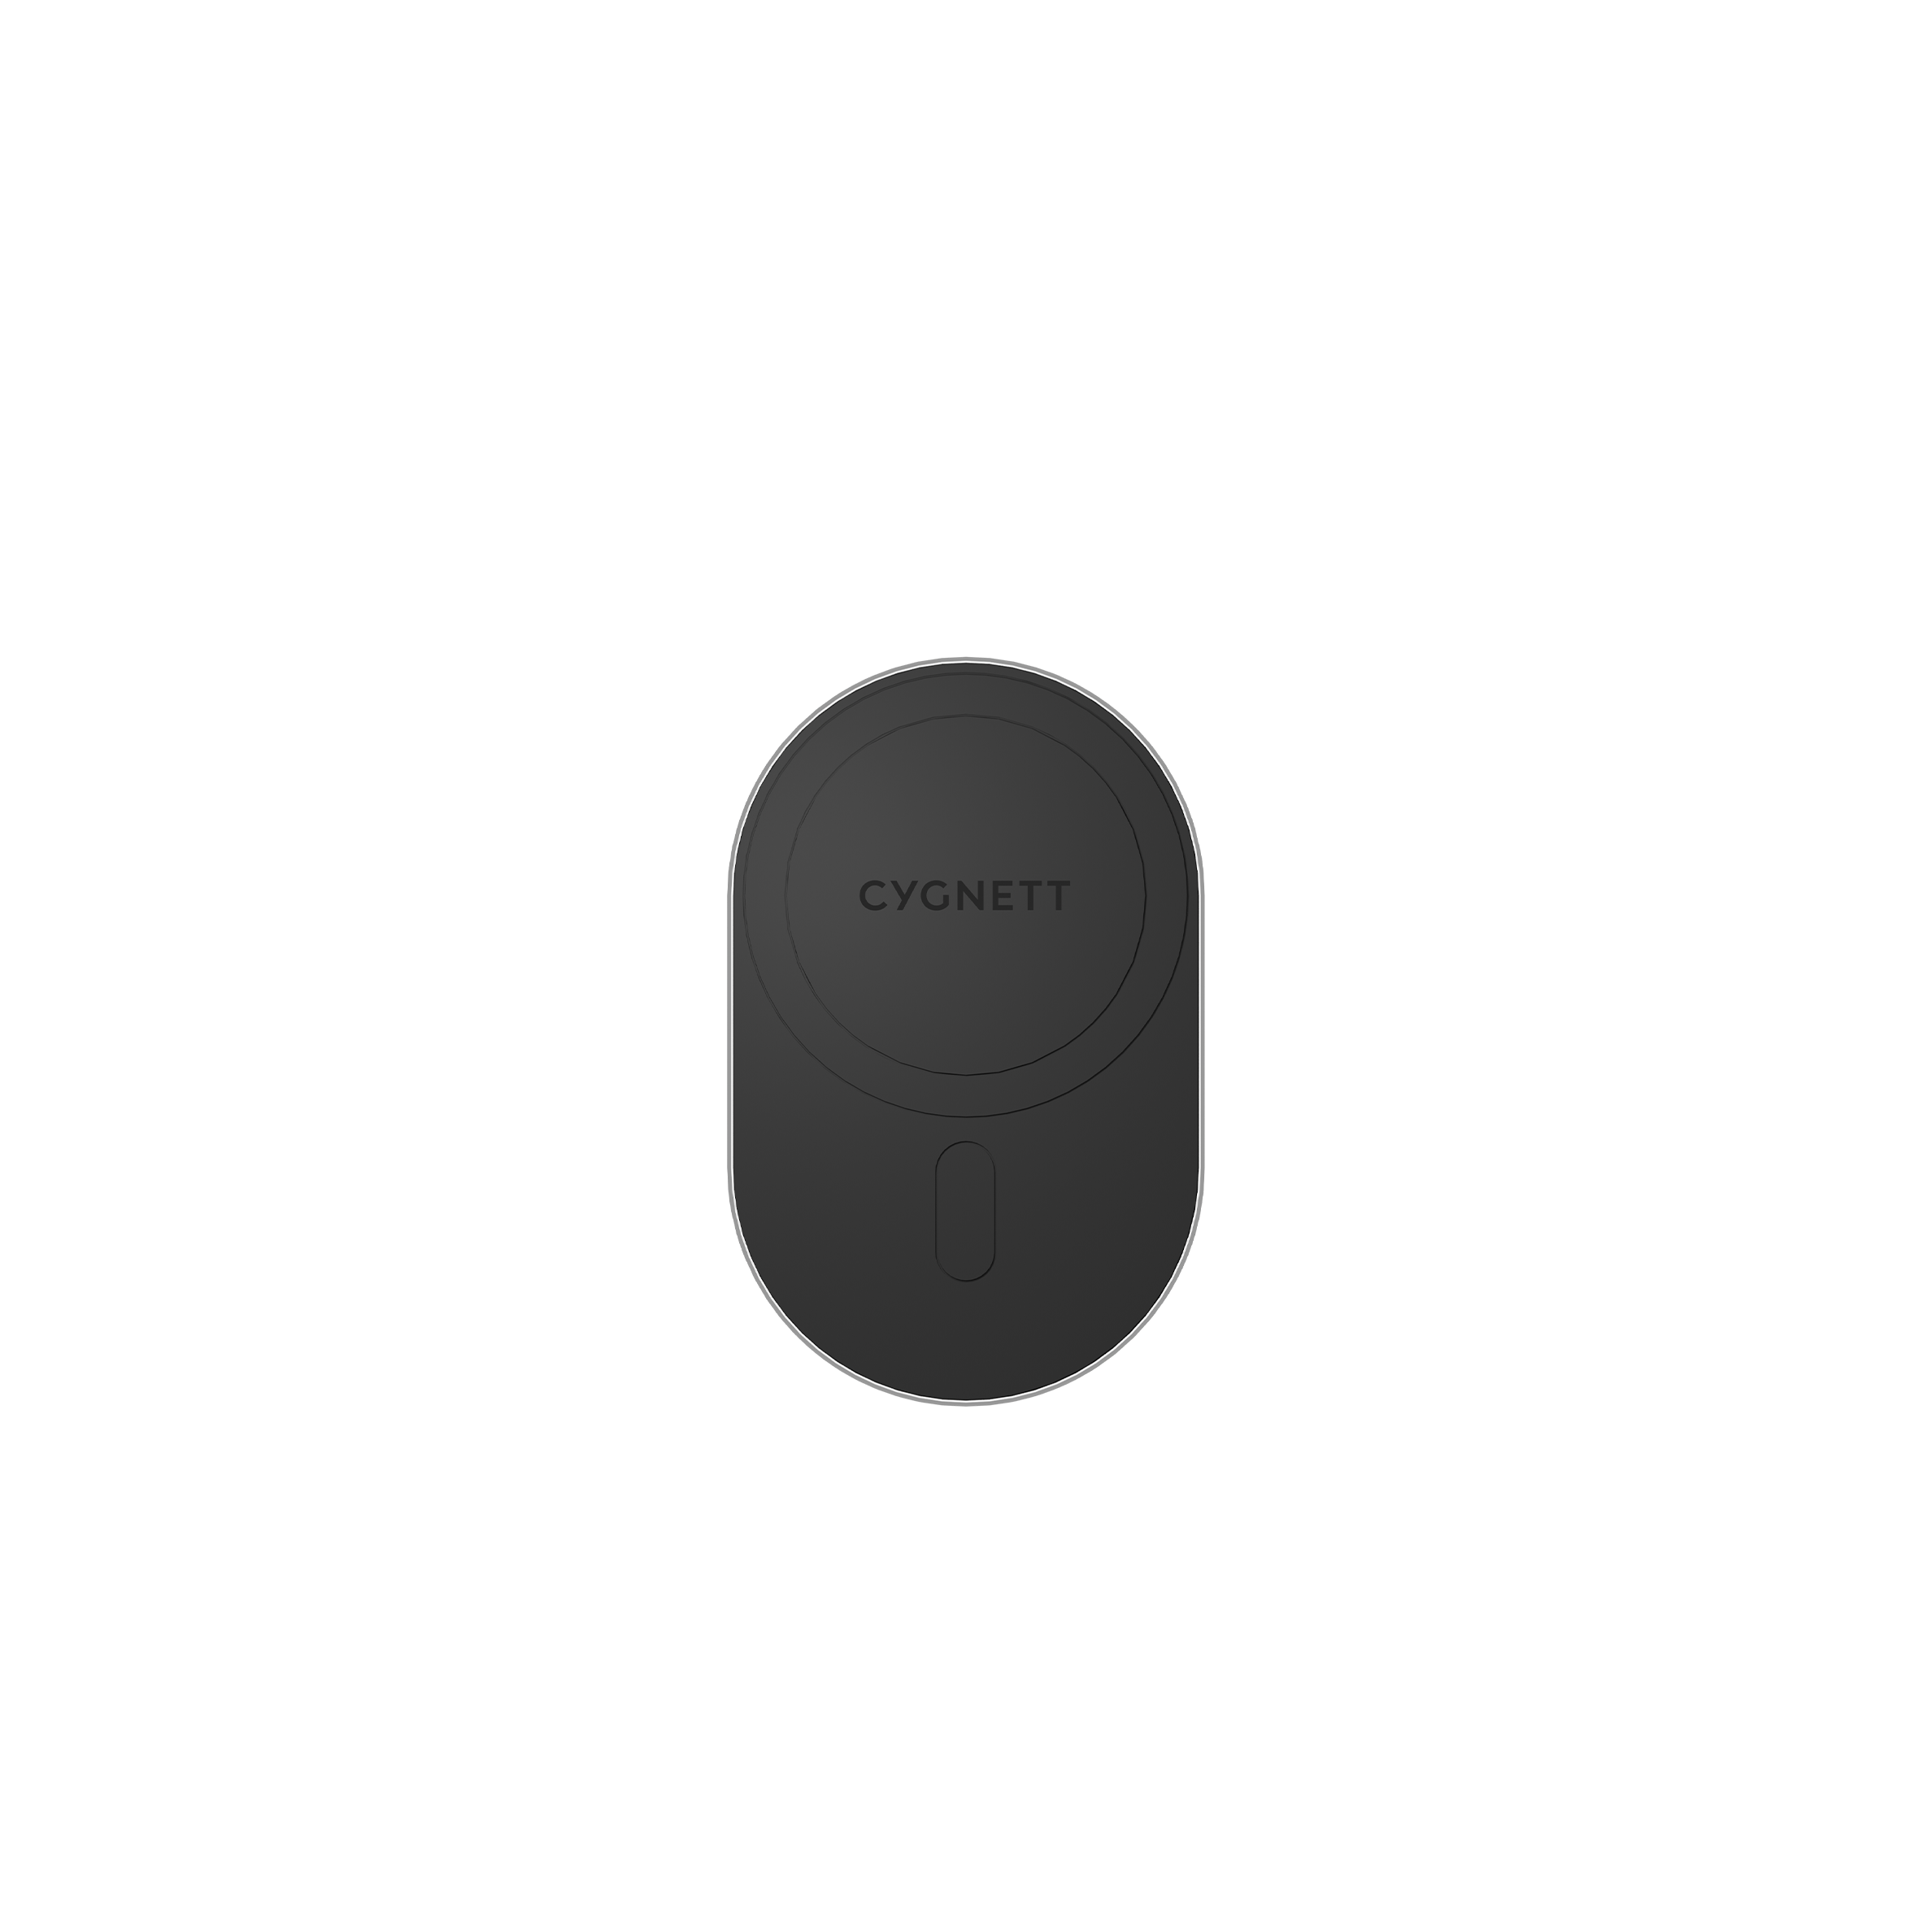 Magnetic Car Wireless Charger - Vent - Cygnett (AU)